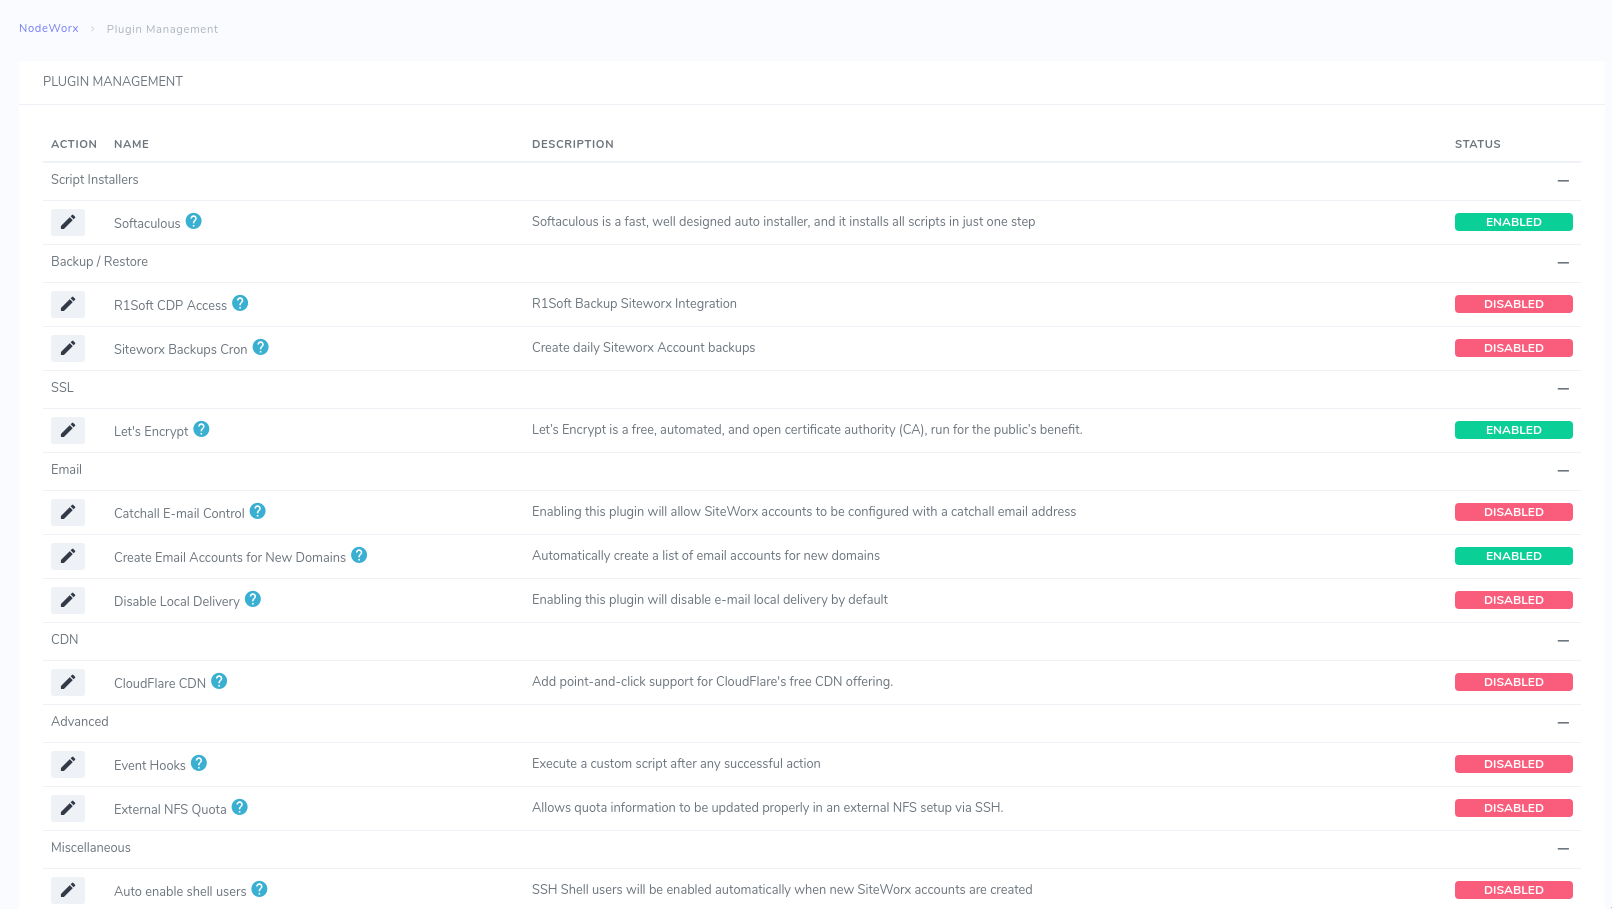 The Plugin Management page in NodeWorx